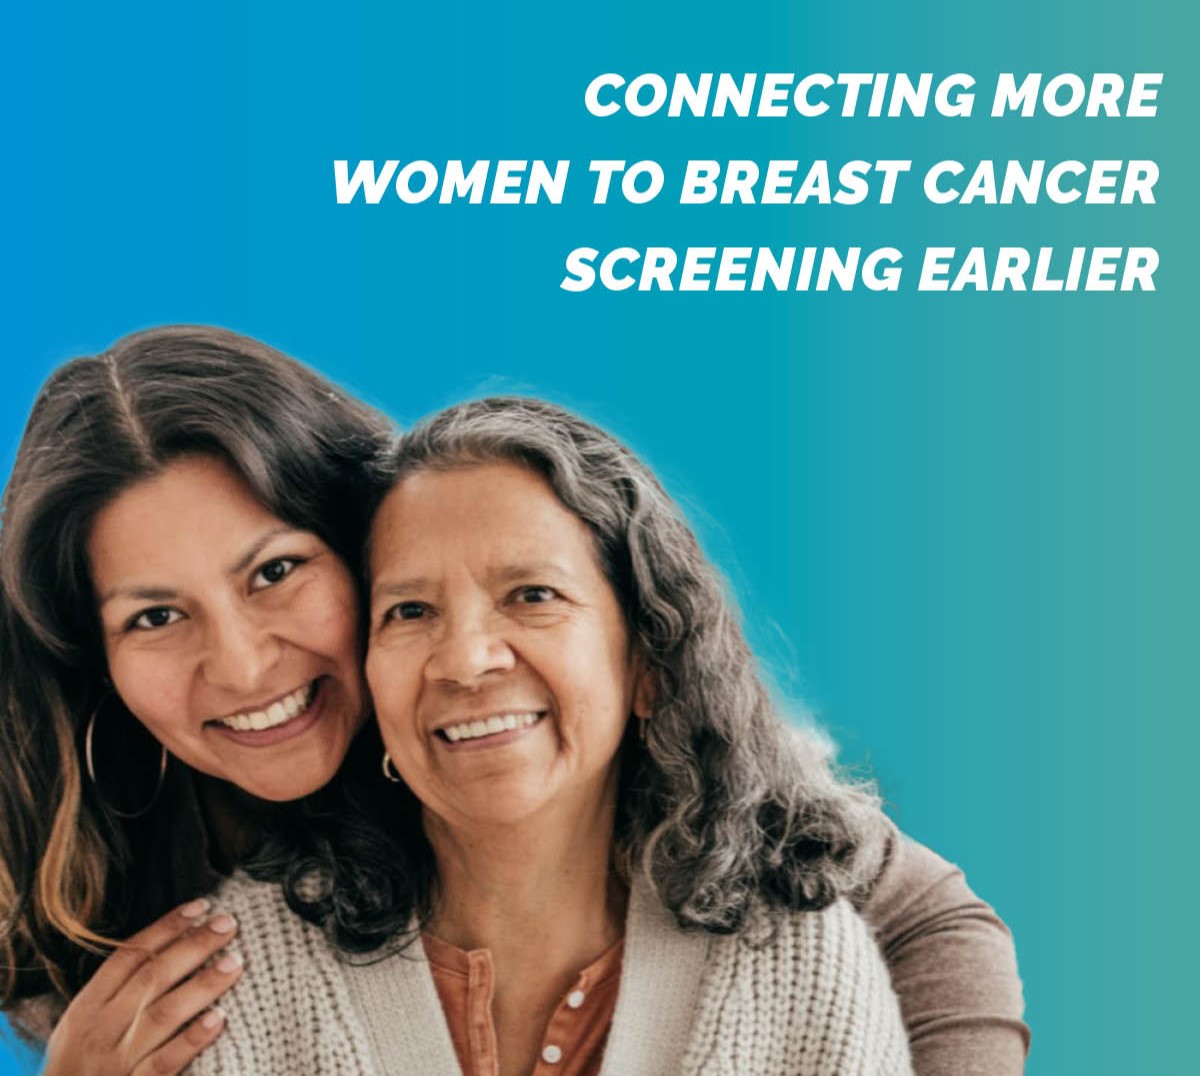 Ontario Connecting More Women to Breast Cancer Screening Earlier